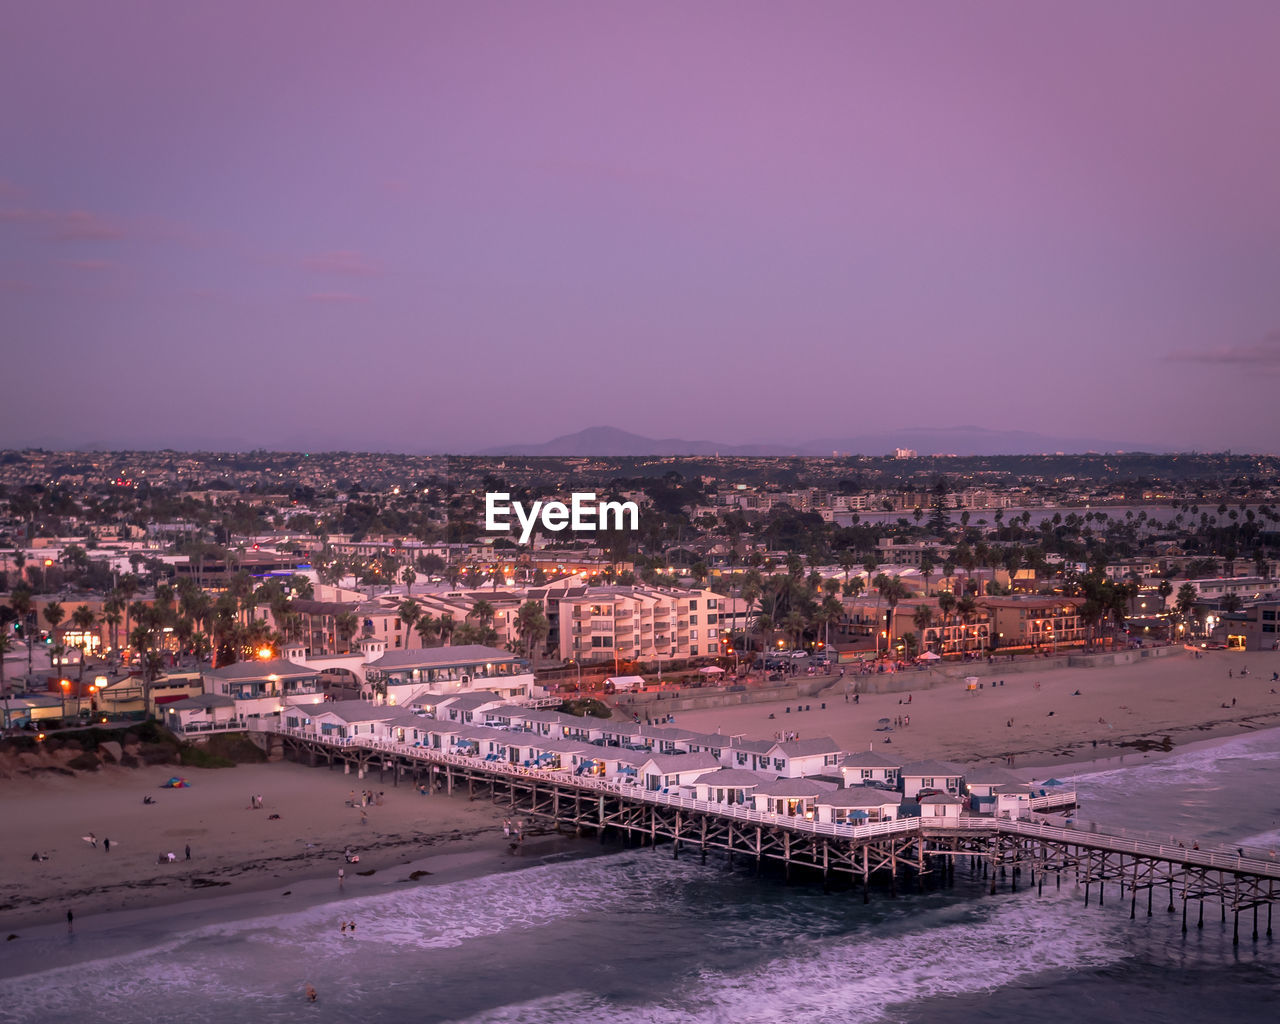 Drone view of crystal pier cottages hotel. san diego california sunset with city lights.